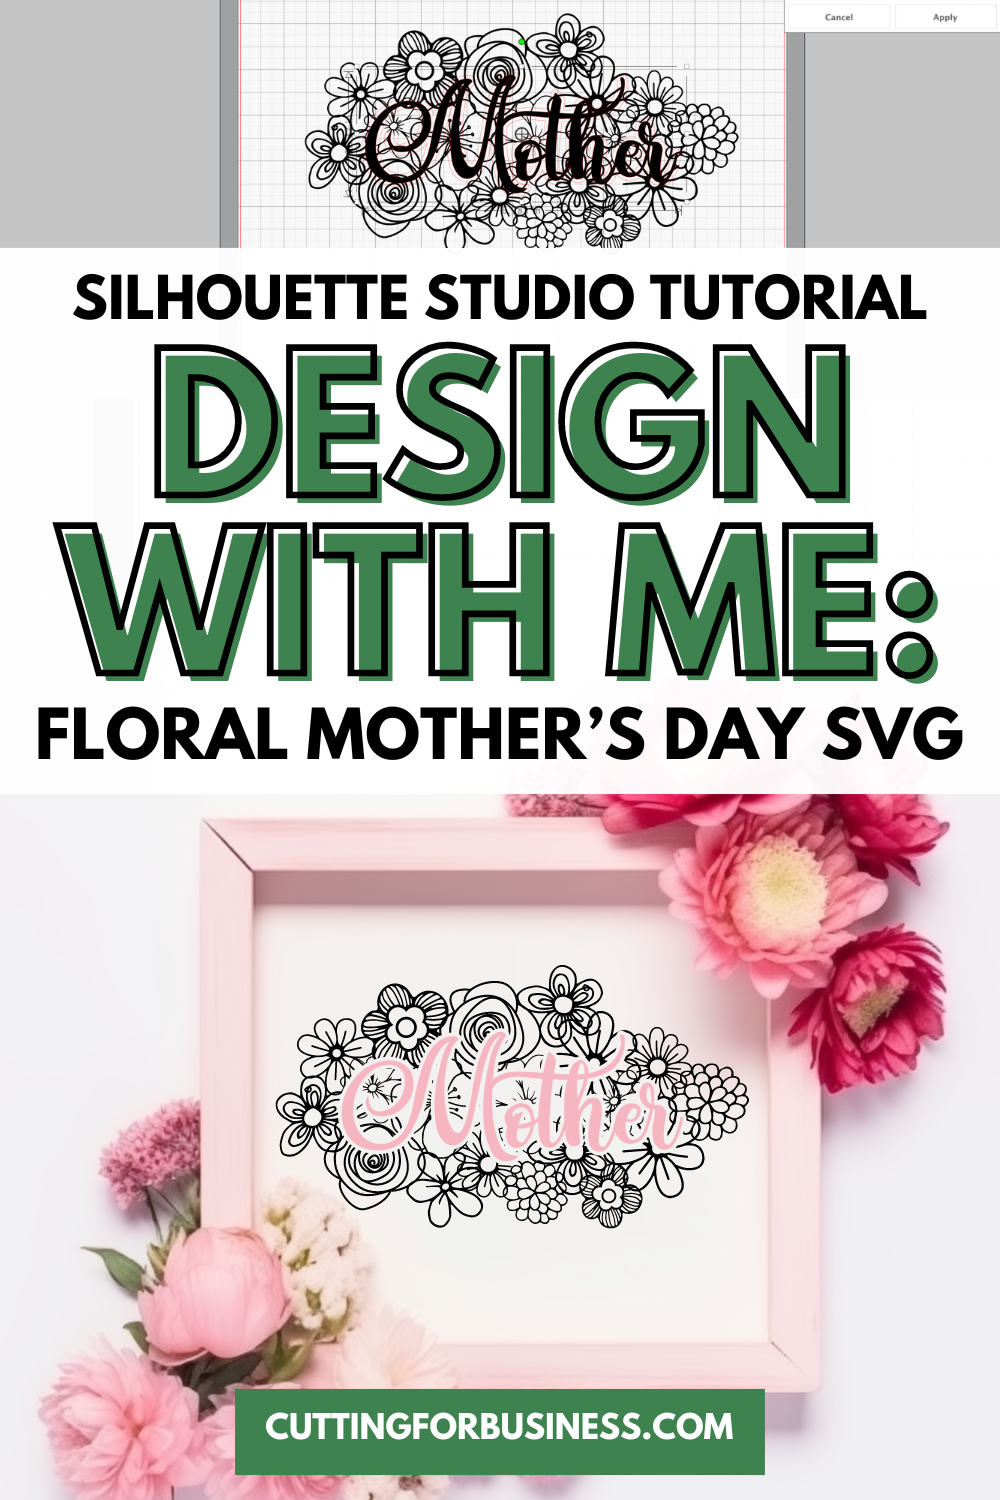 Silhouette Studio Tutorial: Floral Mother's Day SVG - cuttingforbusiness.com